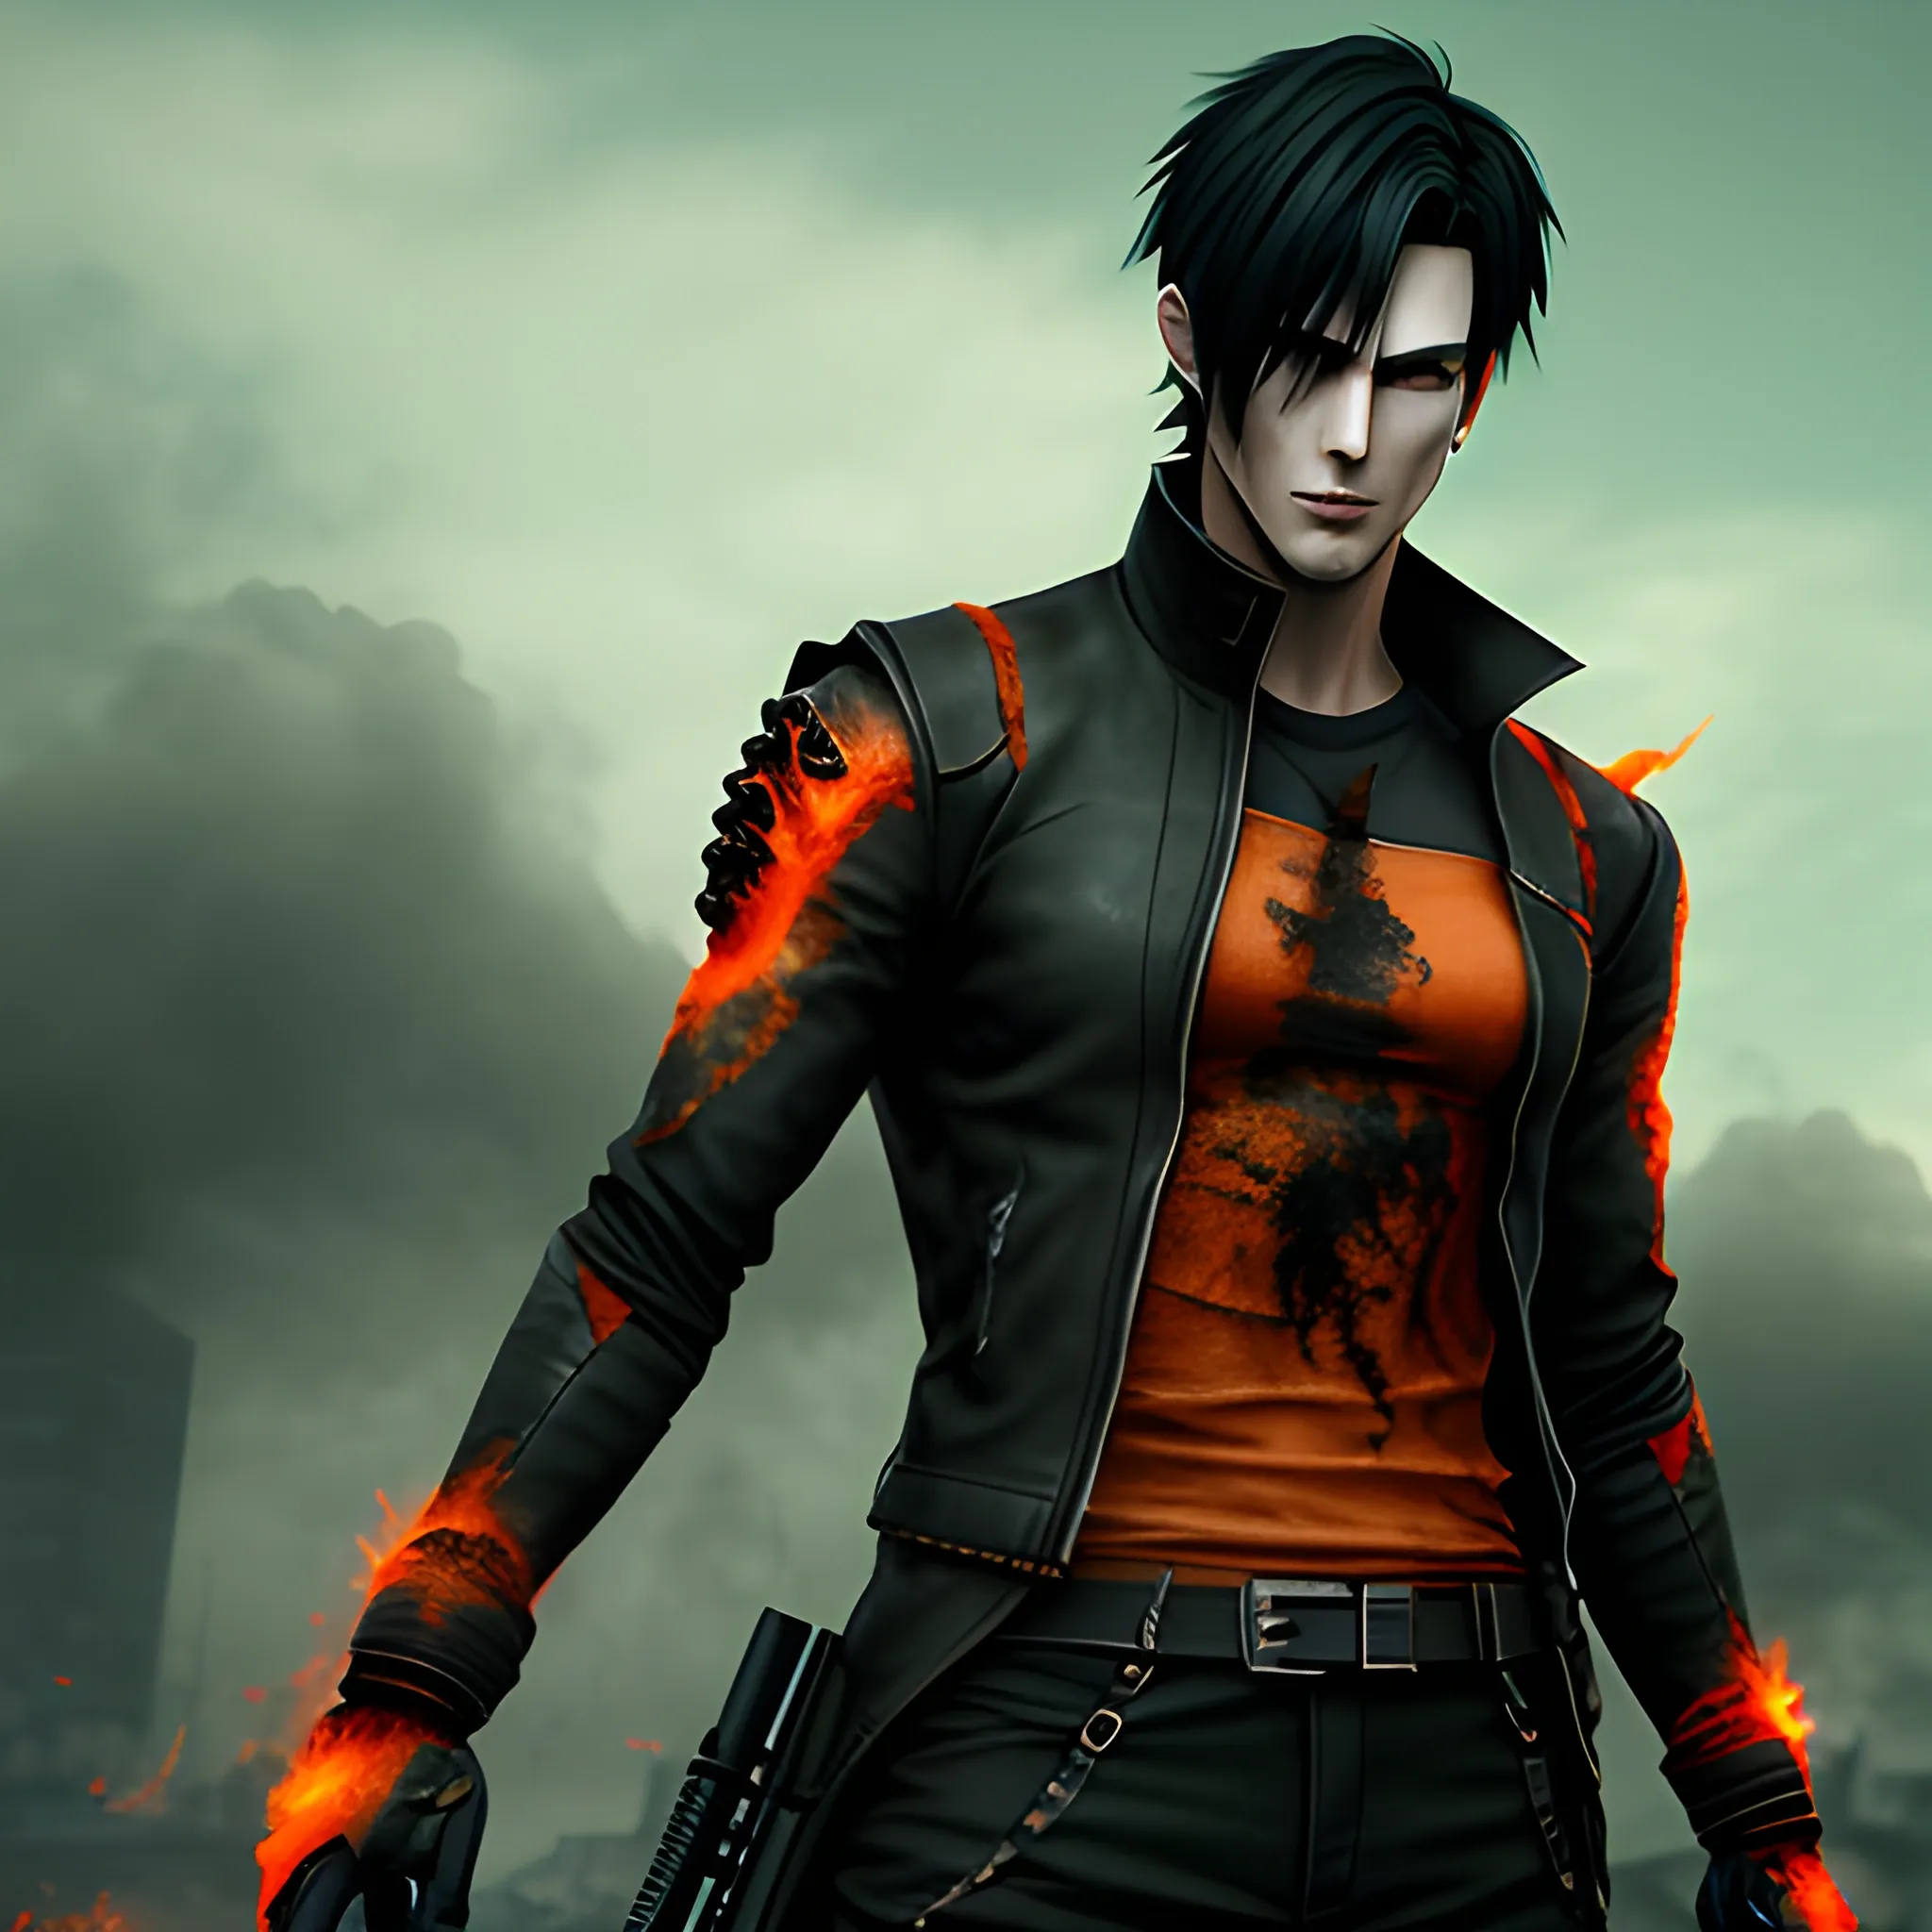 anime young man about 20 years old with dark hair, dark clothes, realistic, 3d render, post apocalyptic world with orange ruined background with a smoky effect, 8k avatar